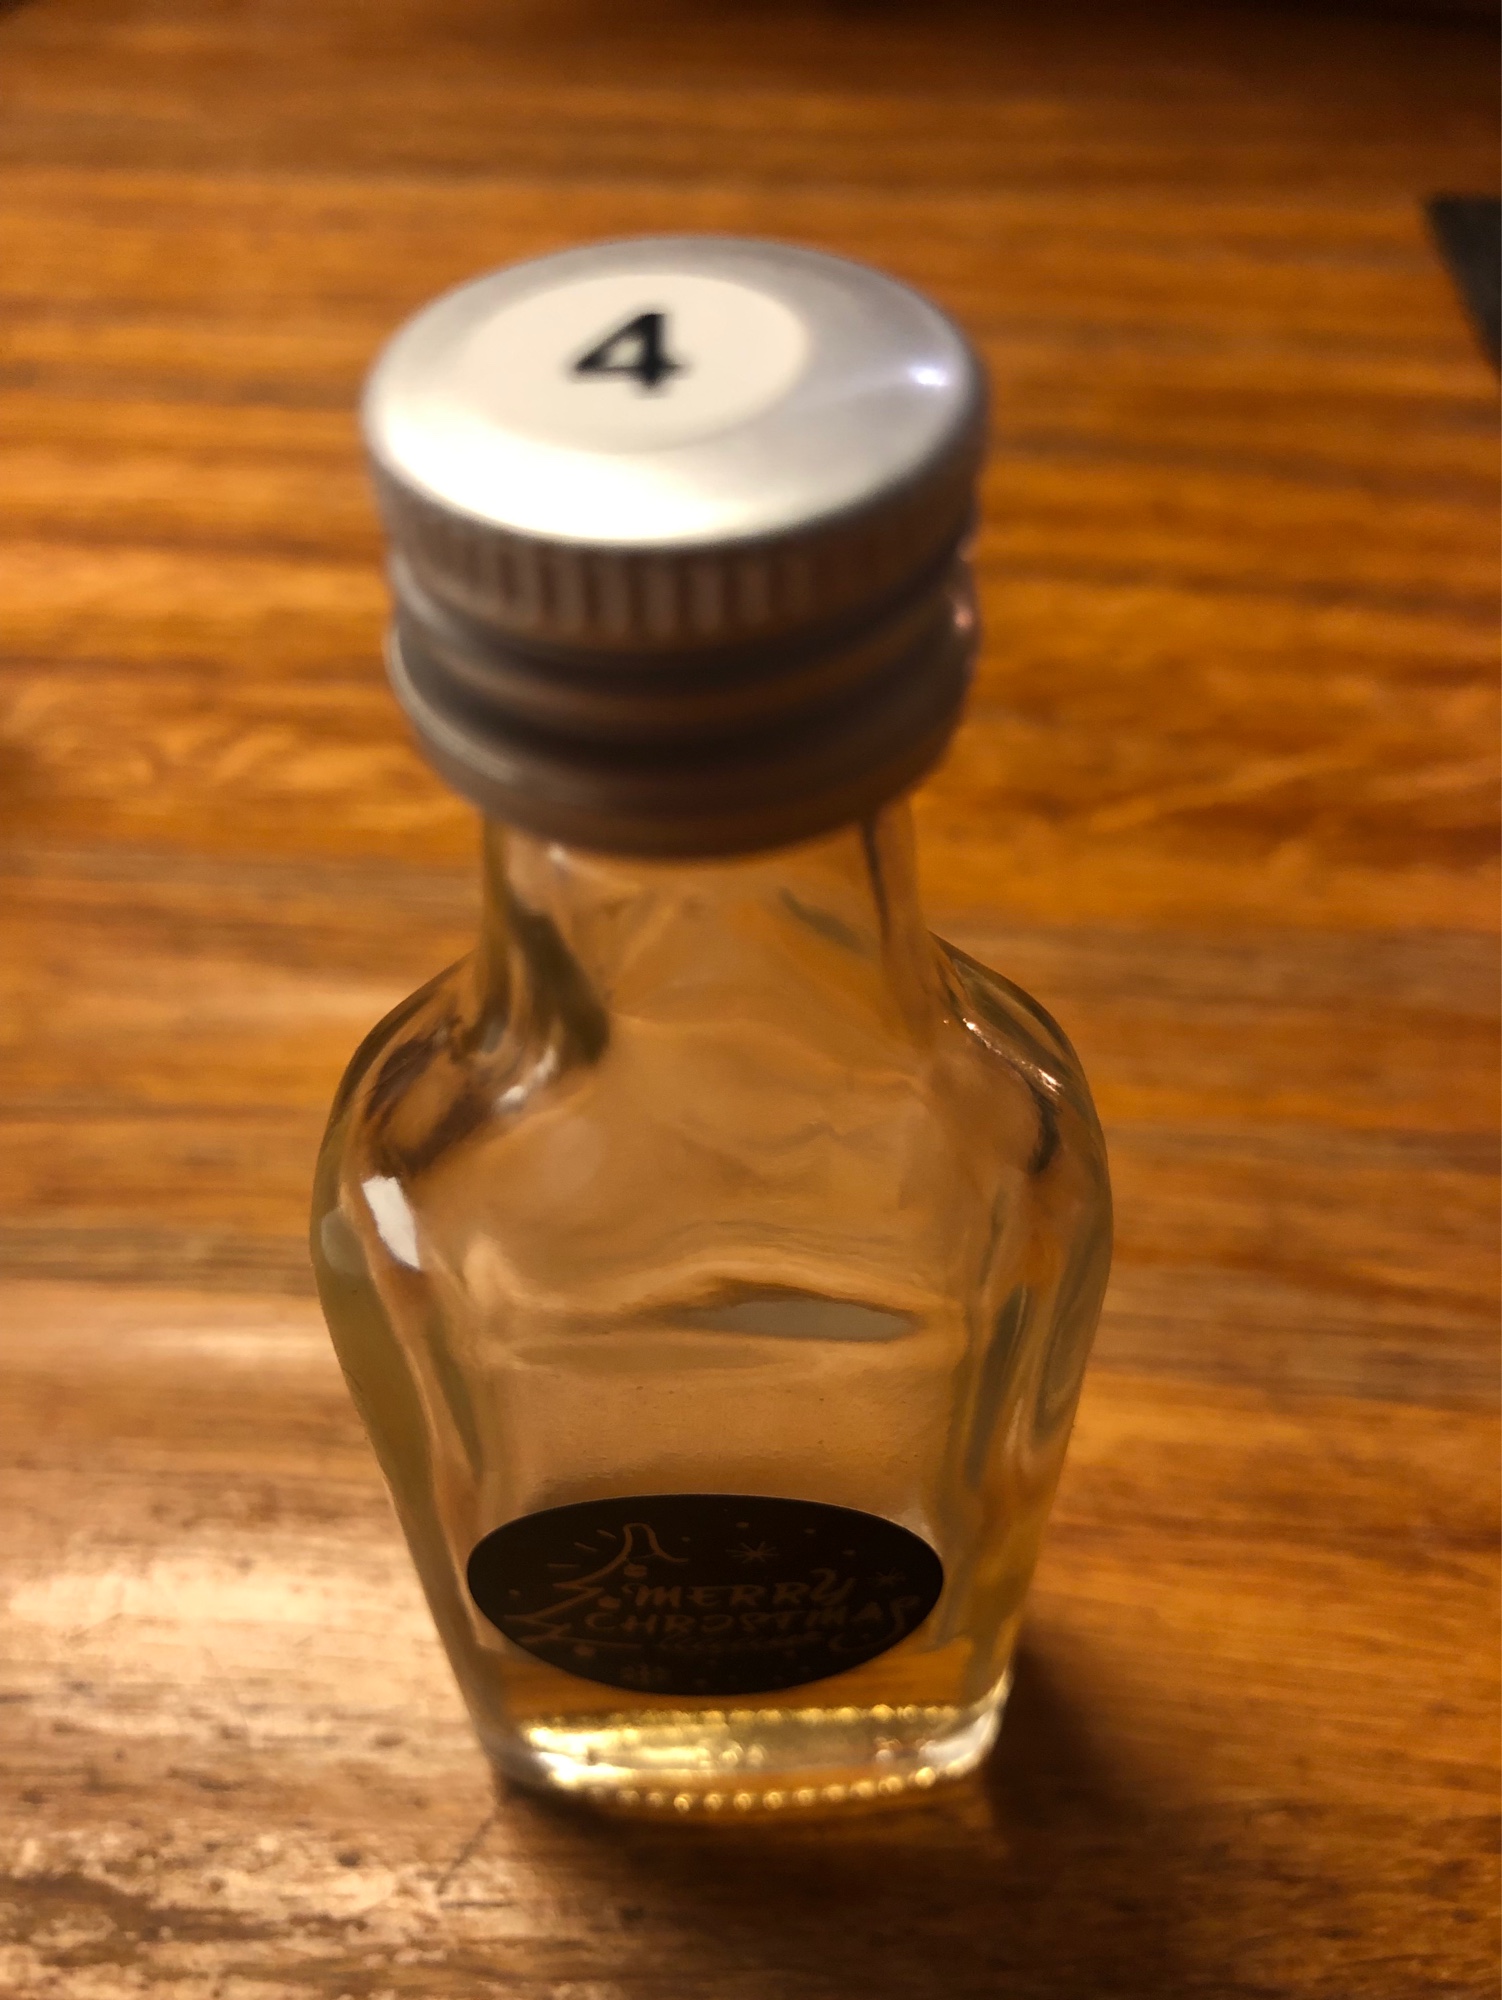 Photo of the bottle taken from user cigares 